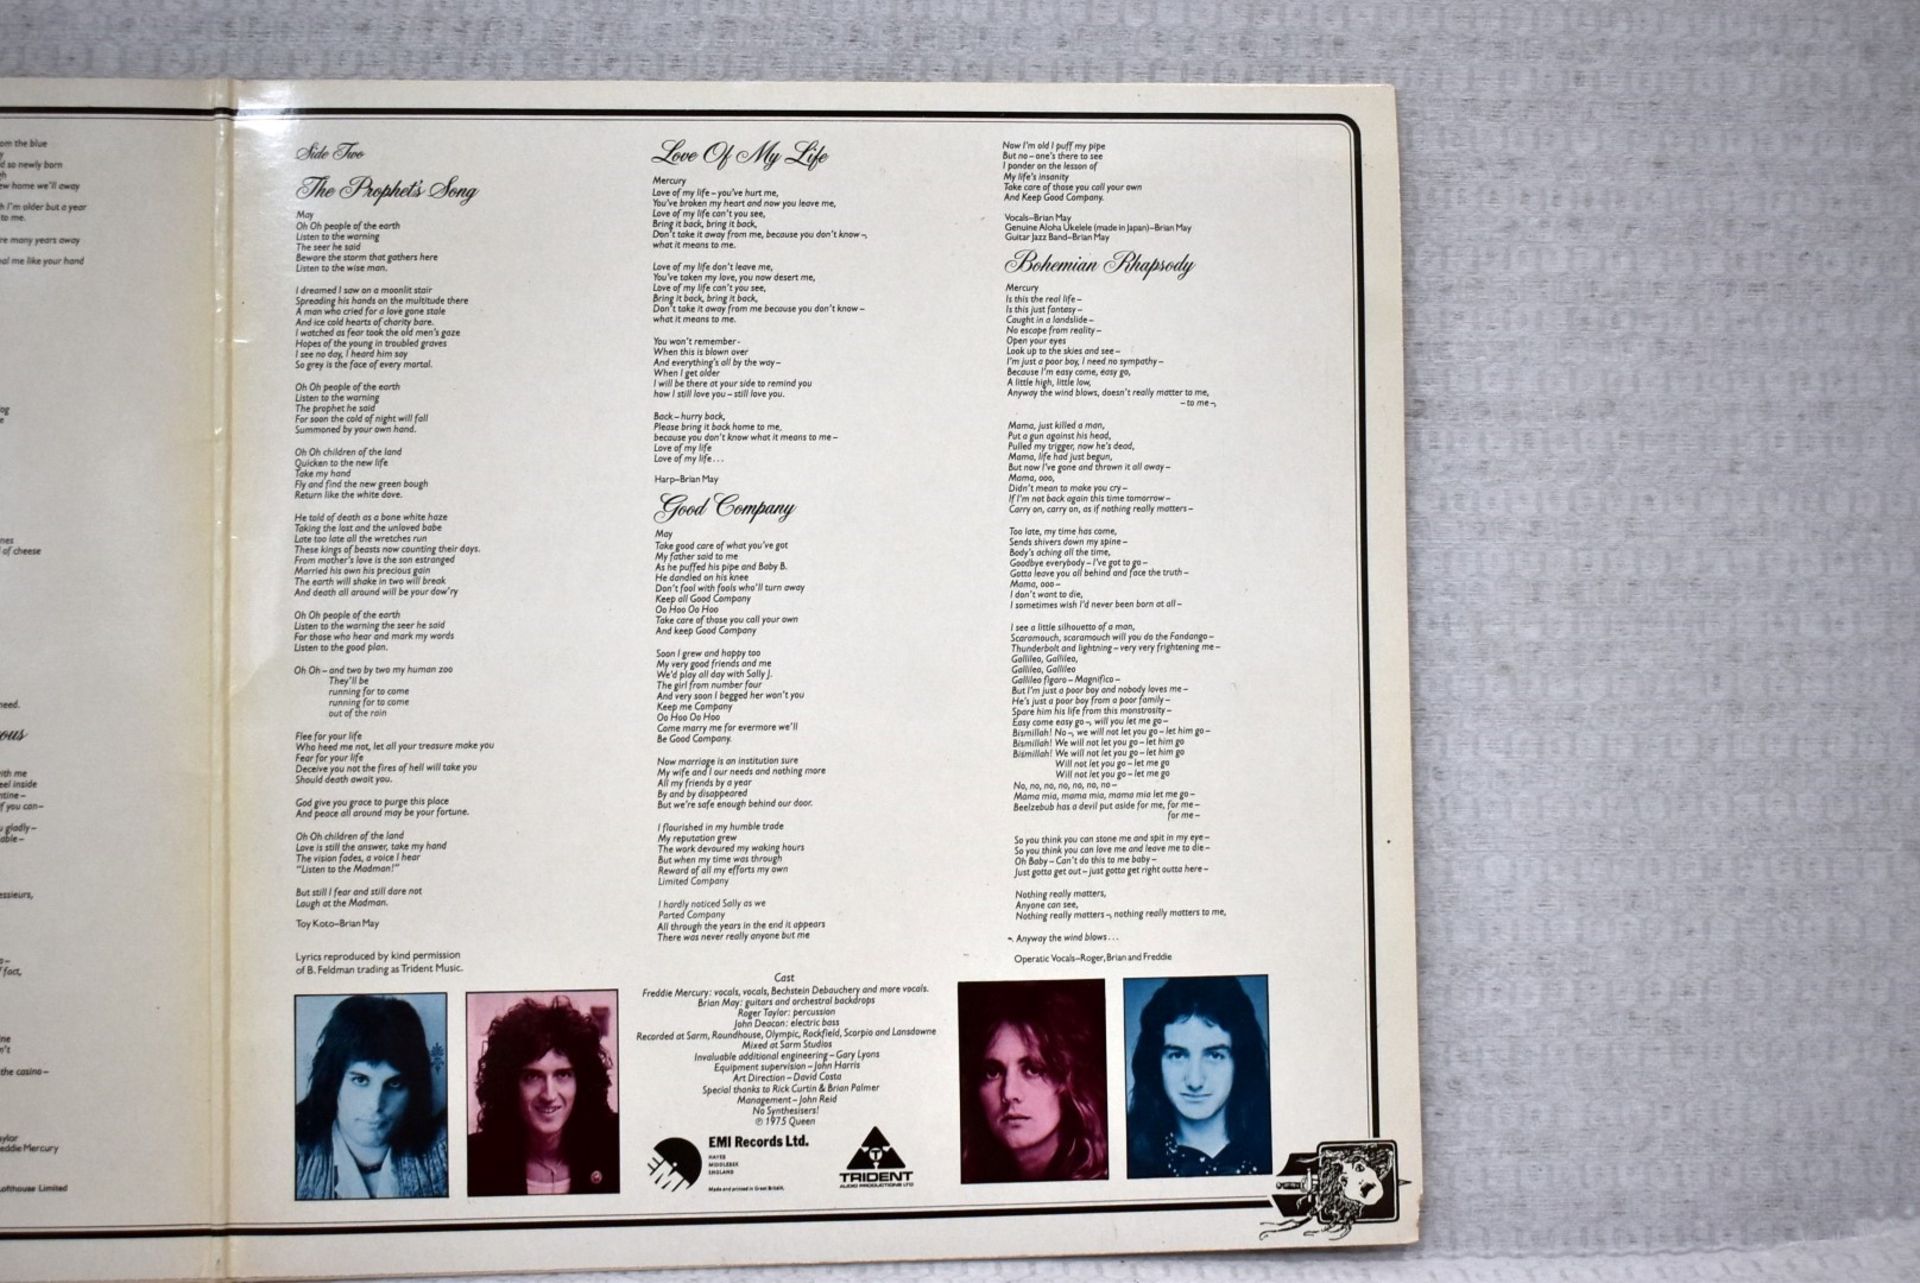 1 x QUEEN A Night At The Opera LP by EMI Records 1975 2 Sided 12 Inch Vinyl with Lyrics - Ref: - Image 10 of 21